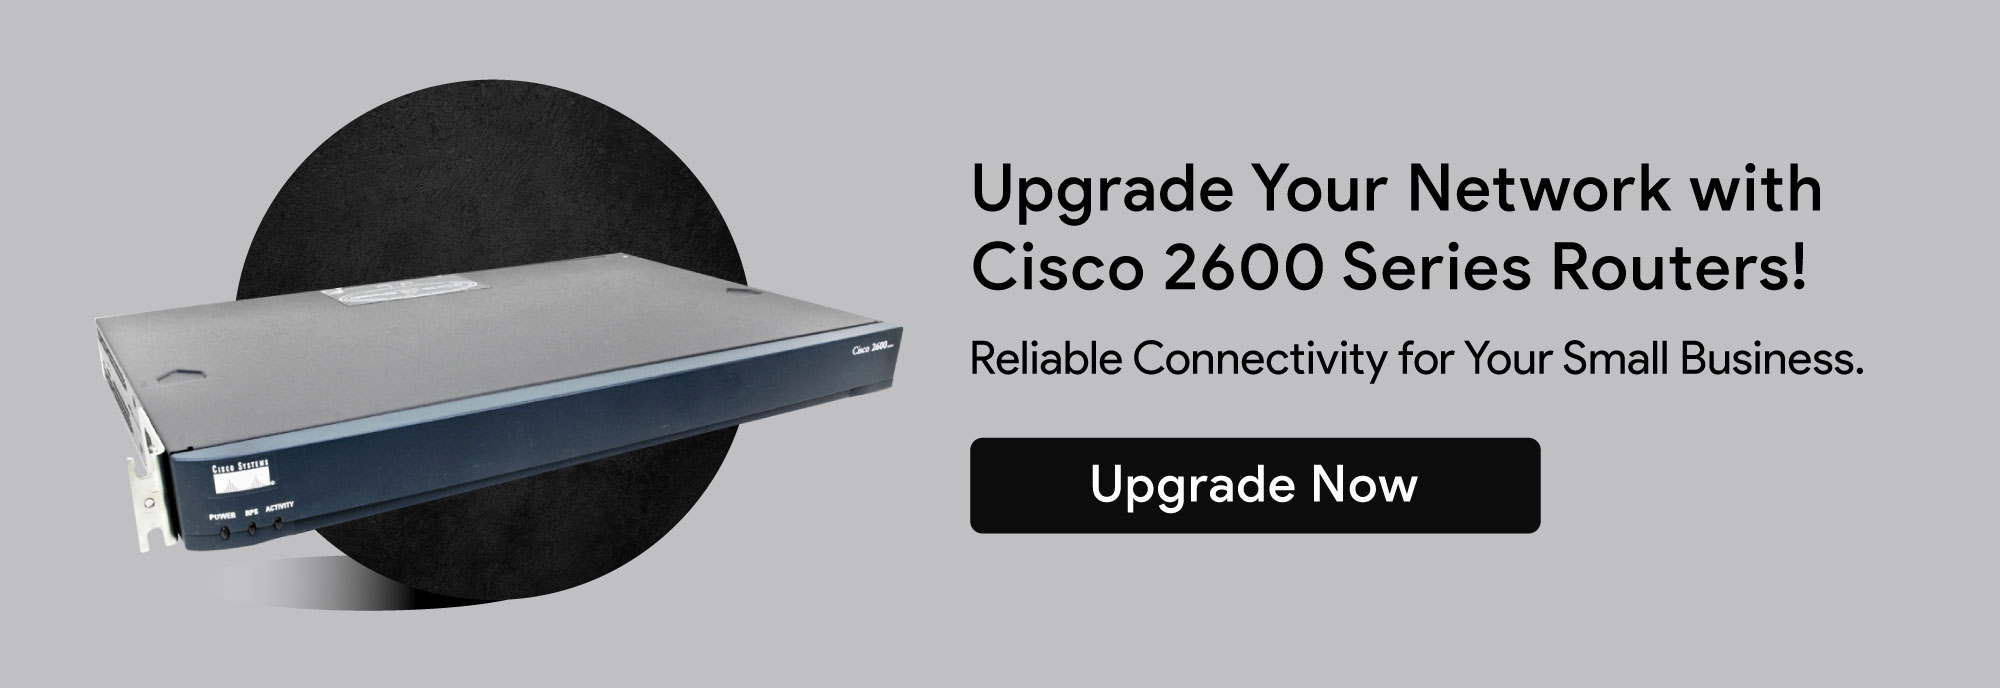 Cisco-2600-Series-Routers